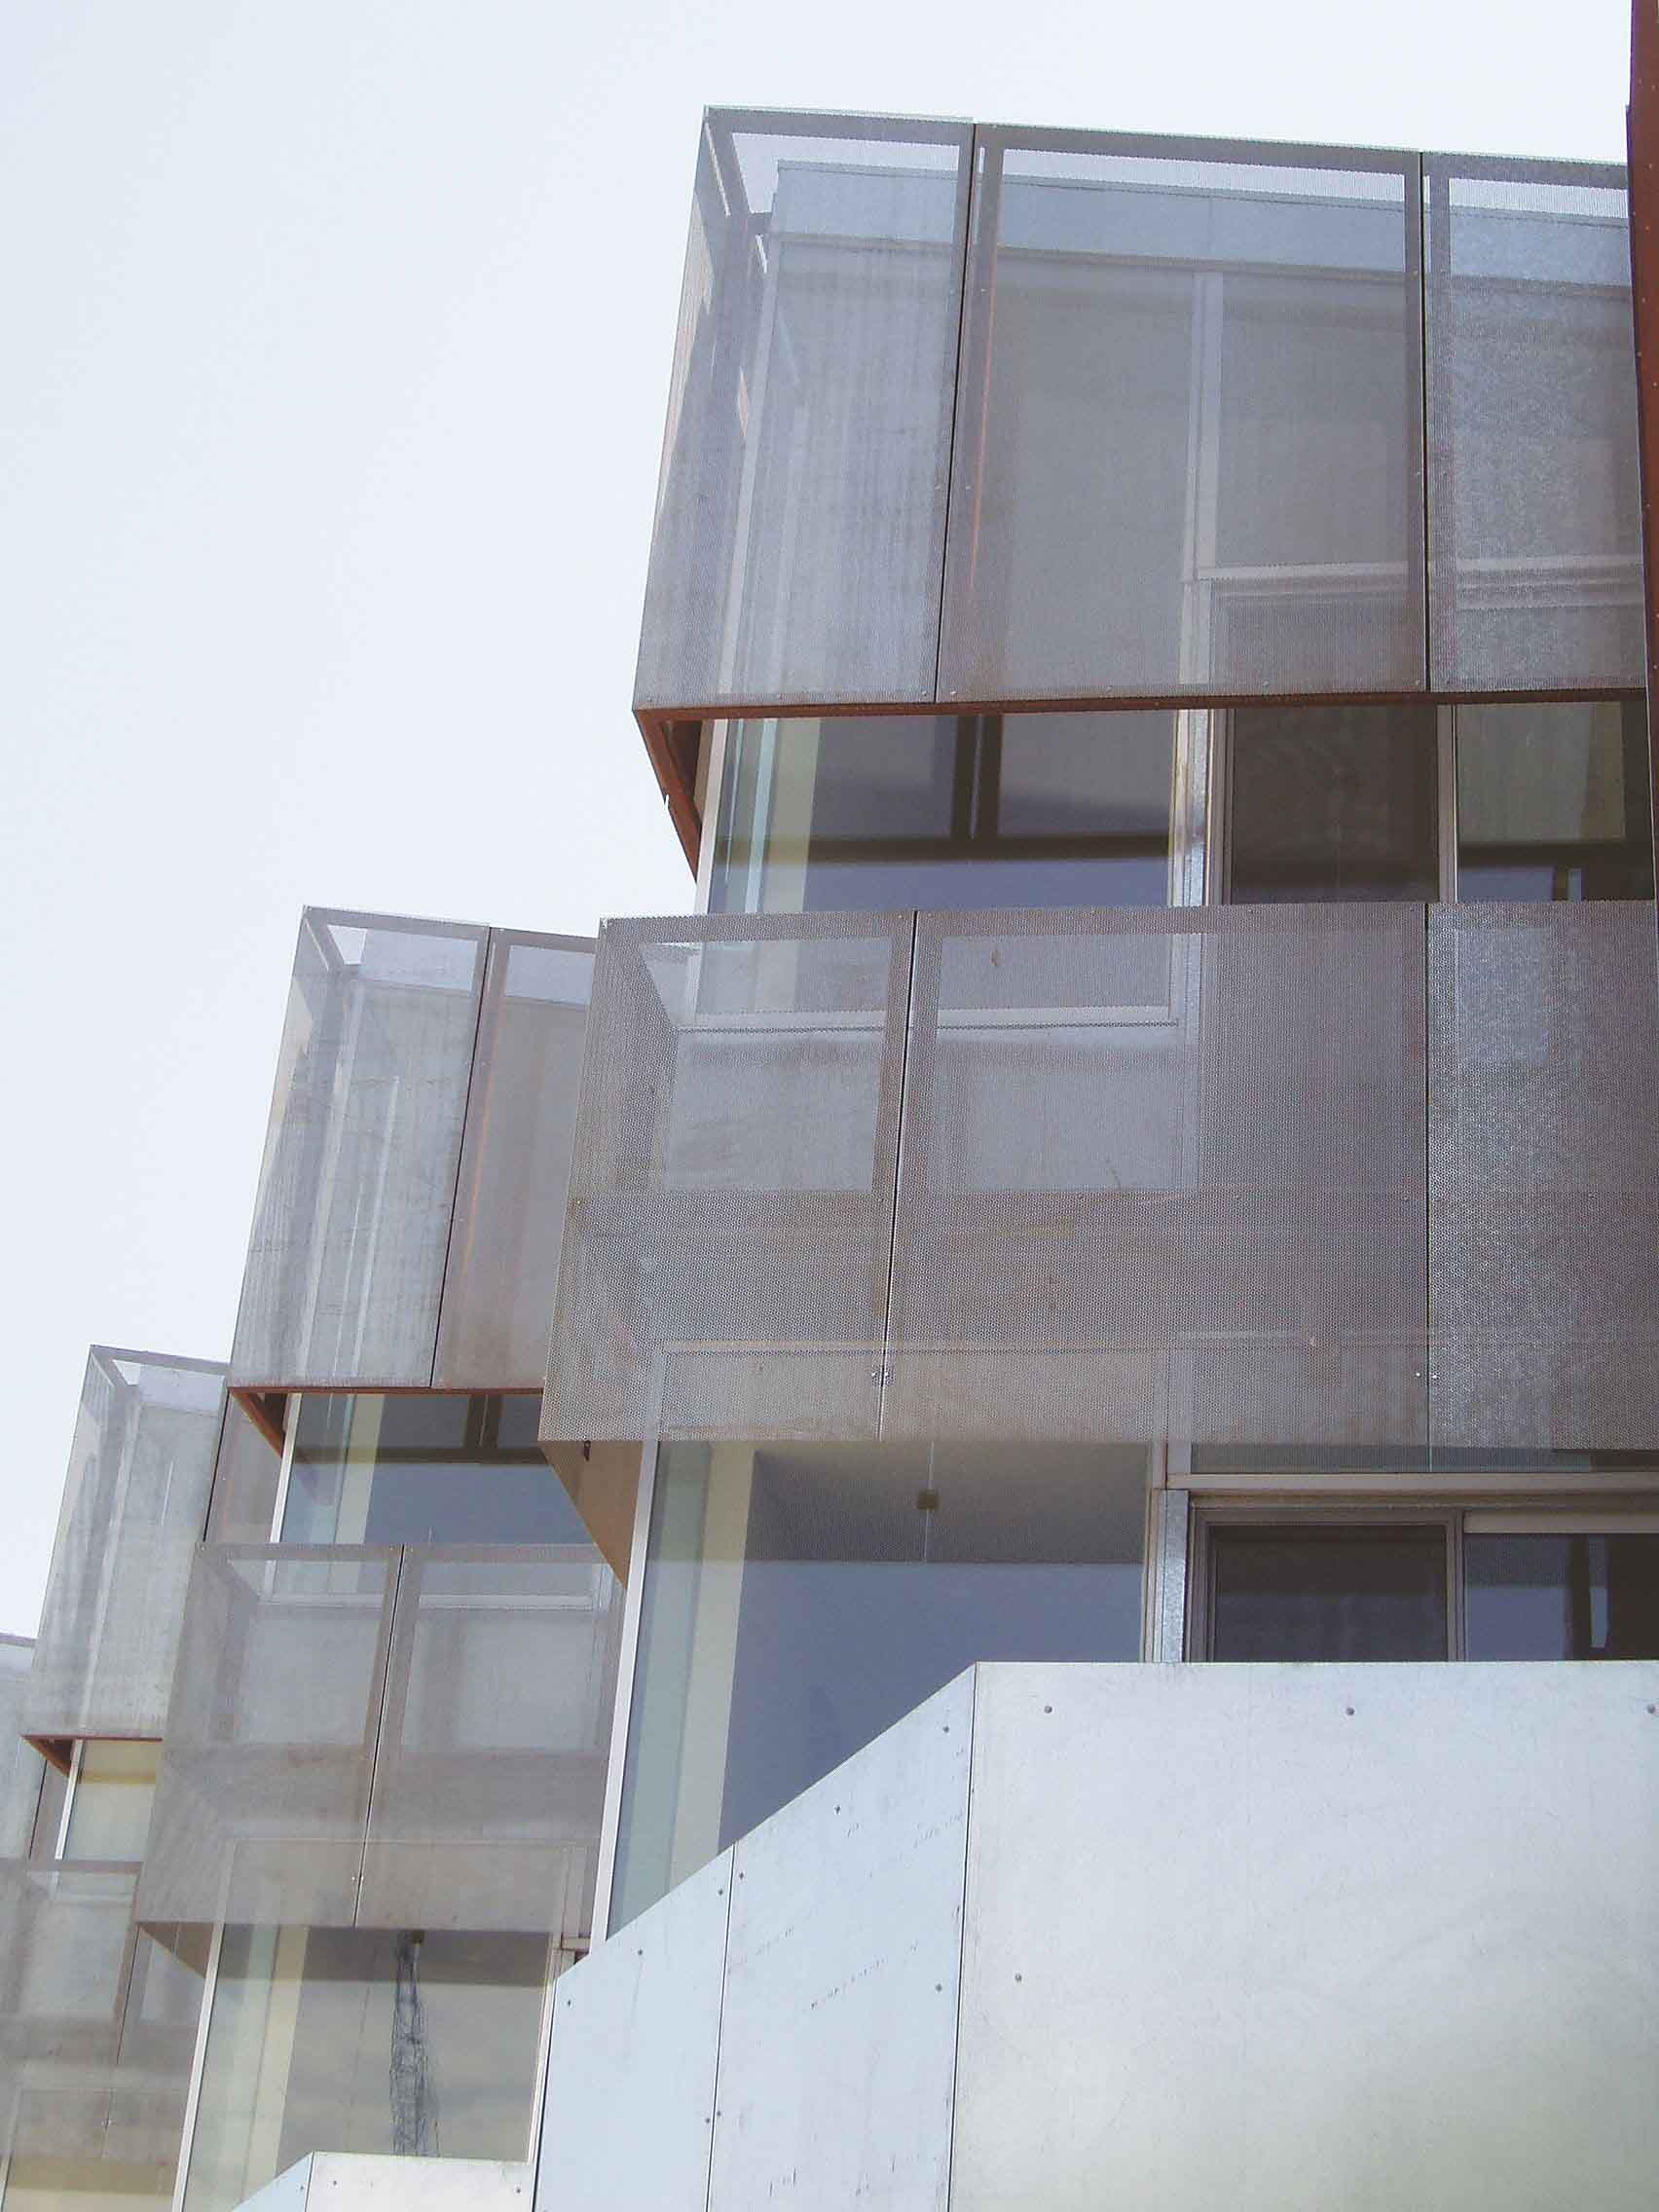 Perforated Metal panels used as sunshades and security on a glass town home.